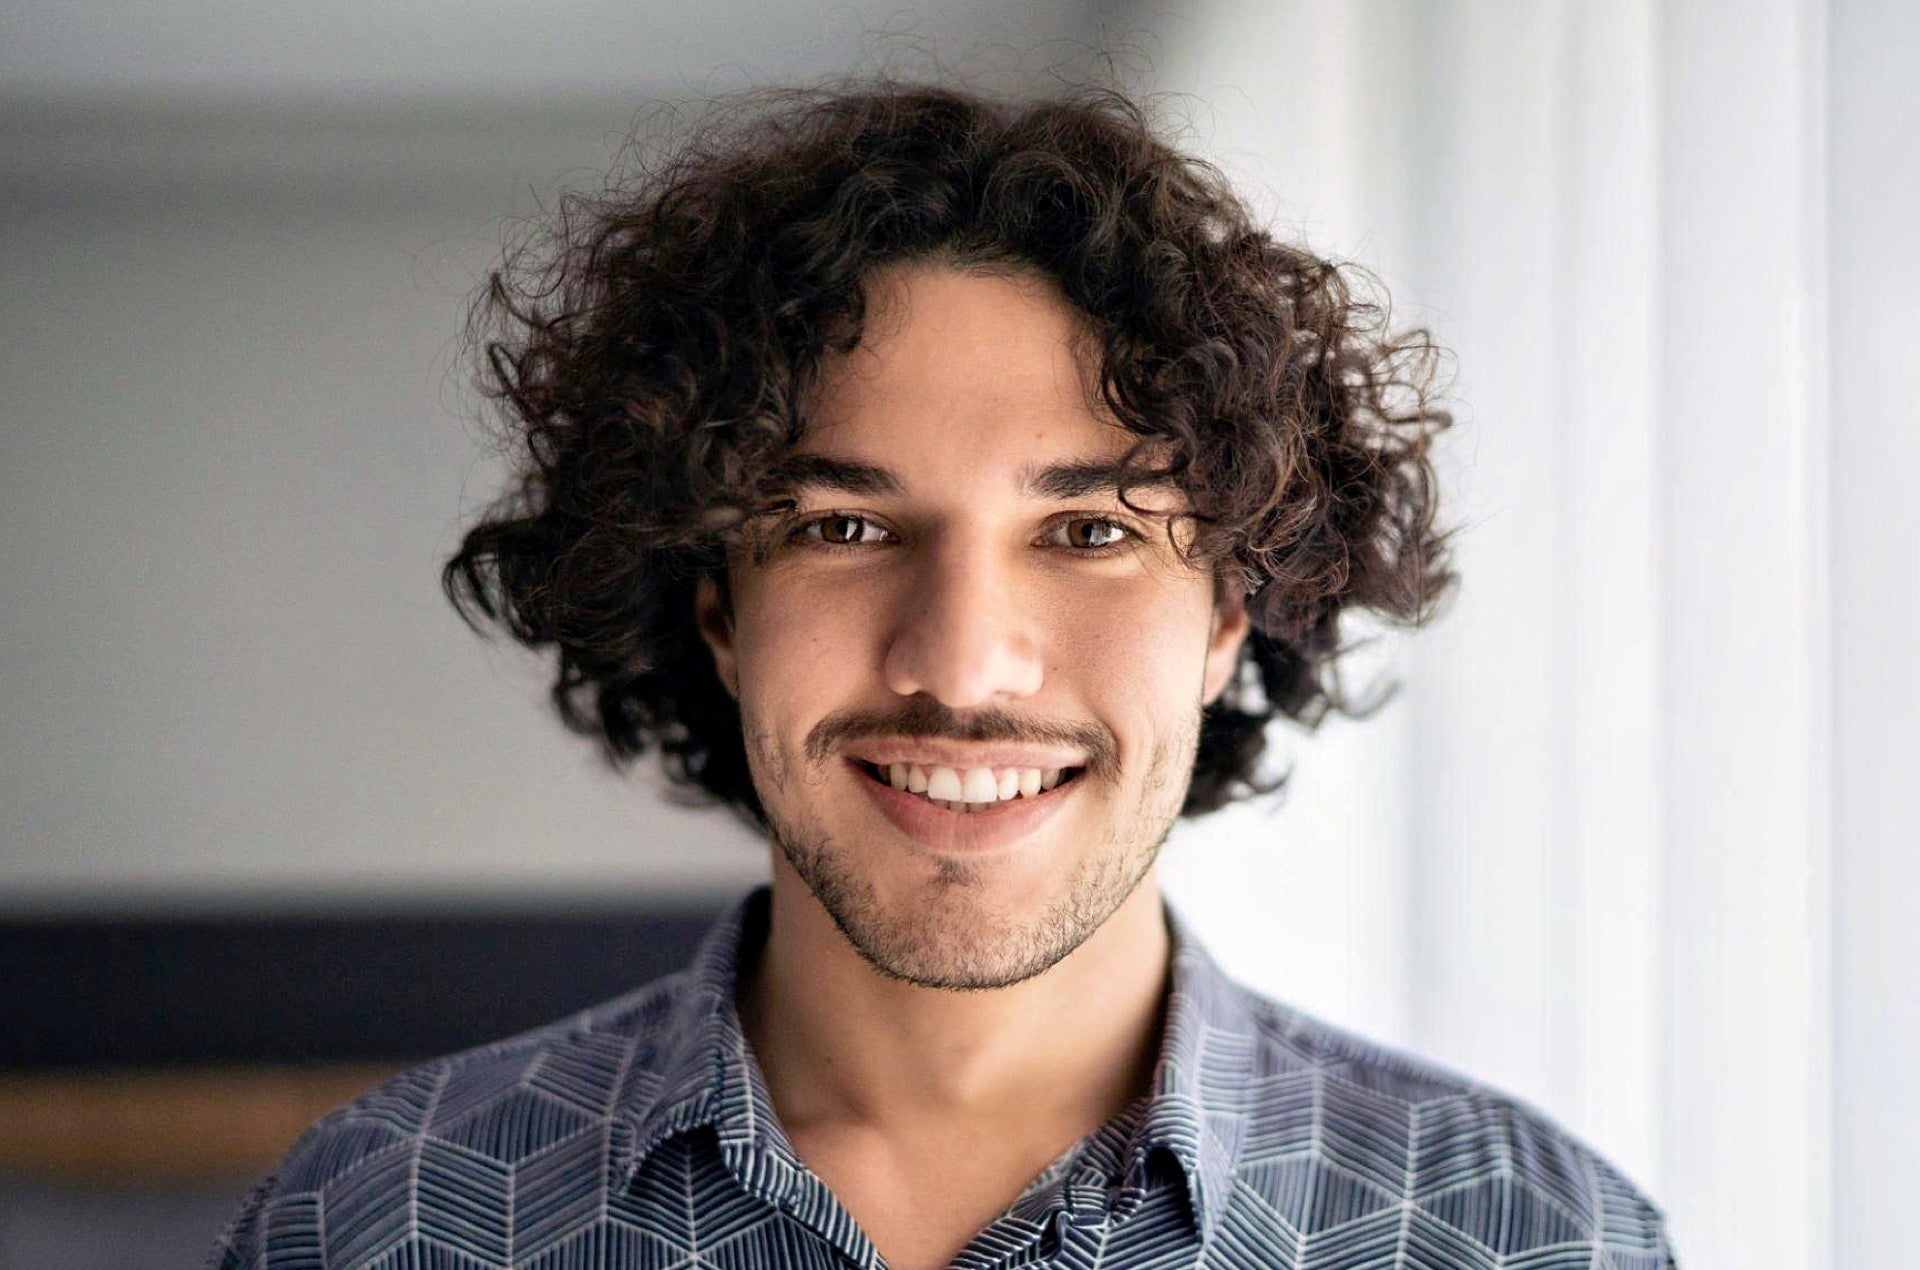 A smiling man with short, curly hair, encouraging viewers to question, "what is my hair type?" while exemplifying a curly hair type.